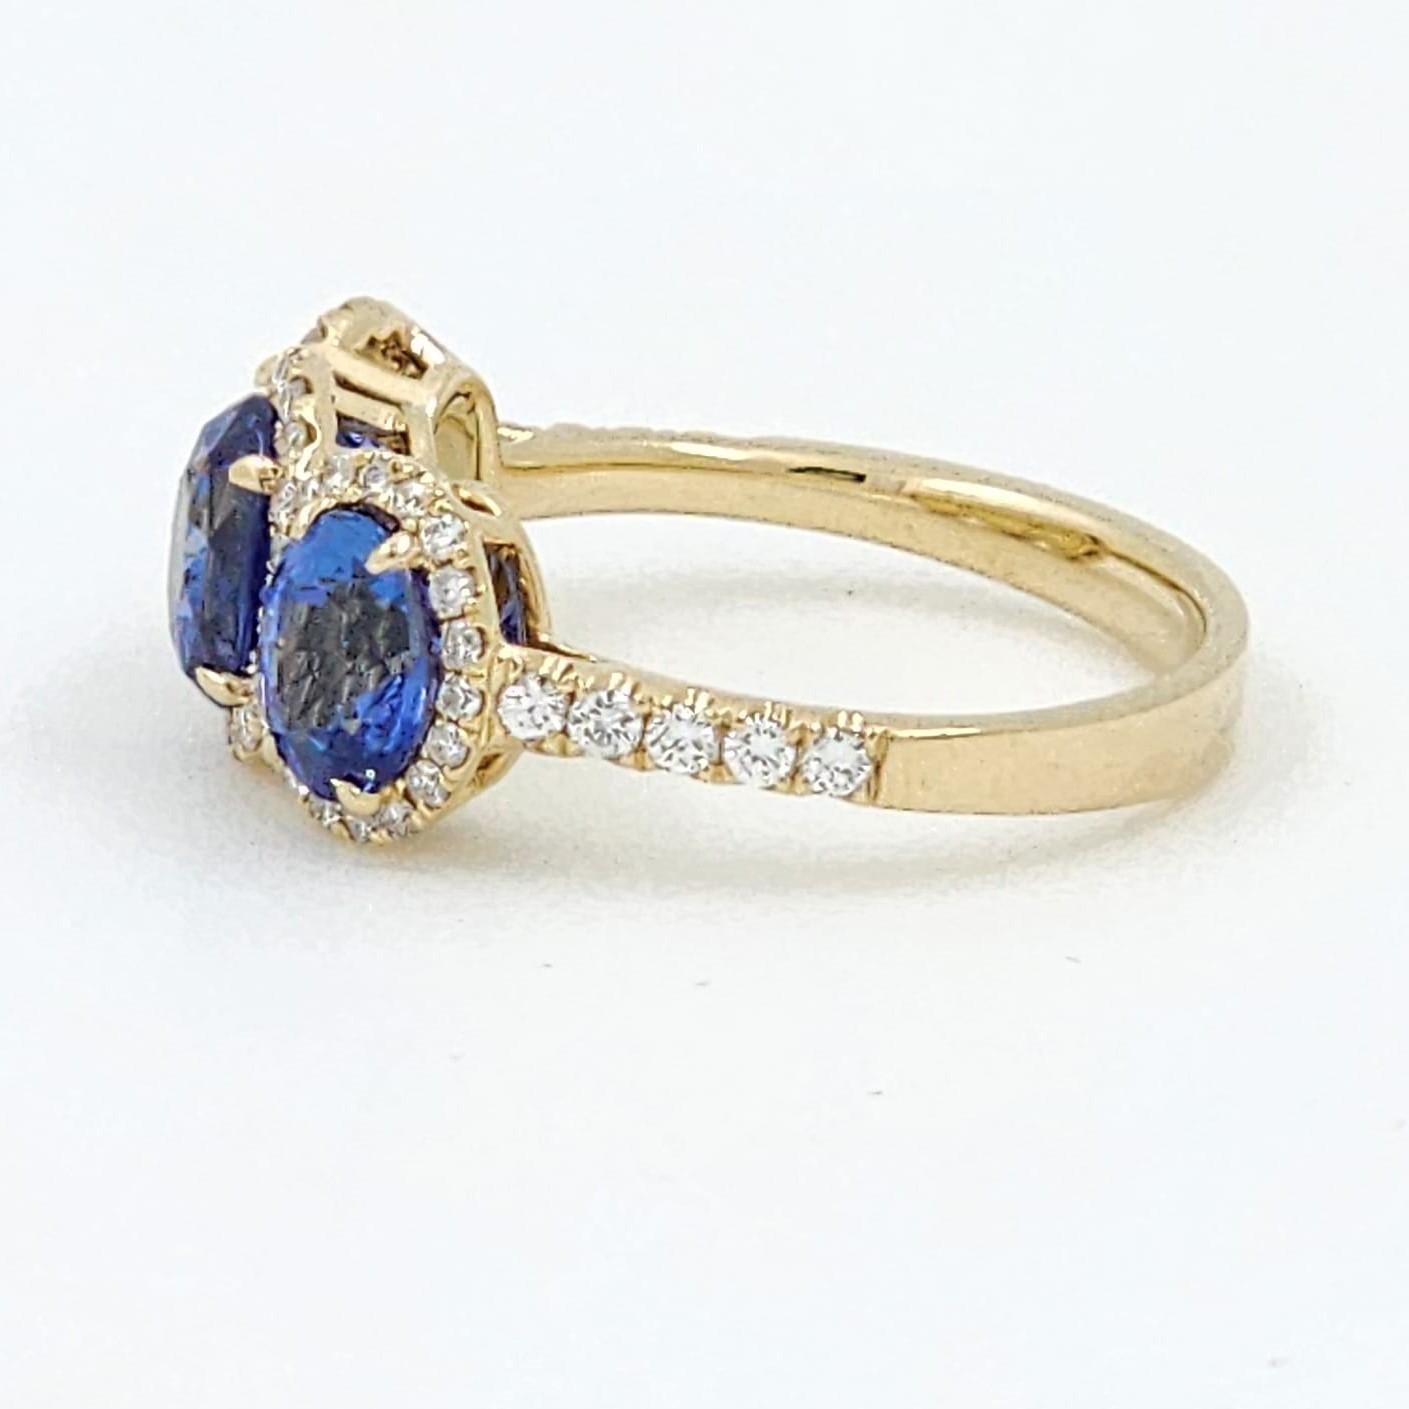 Oval Cut 3.81 Carat Blue Sapphire and Diamond Ring in 14 Karat Yellow Gold For Sale